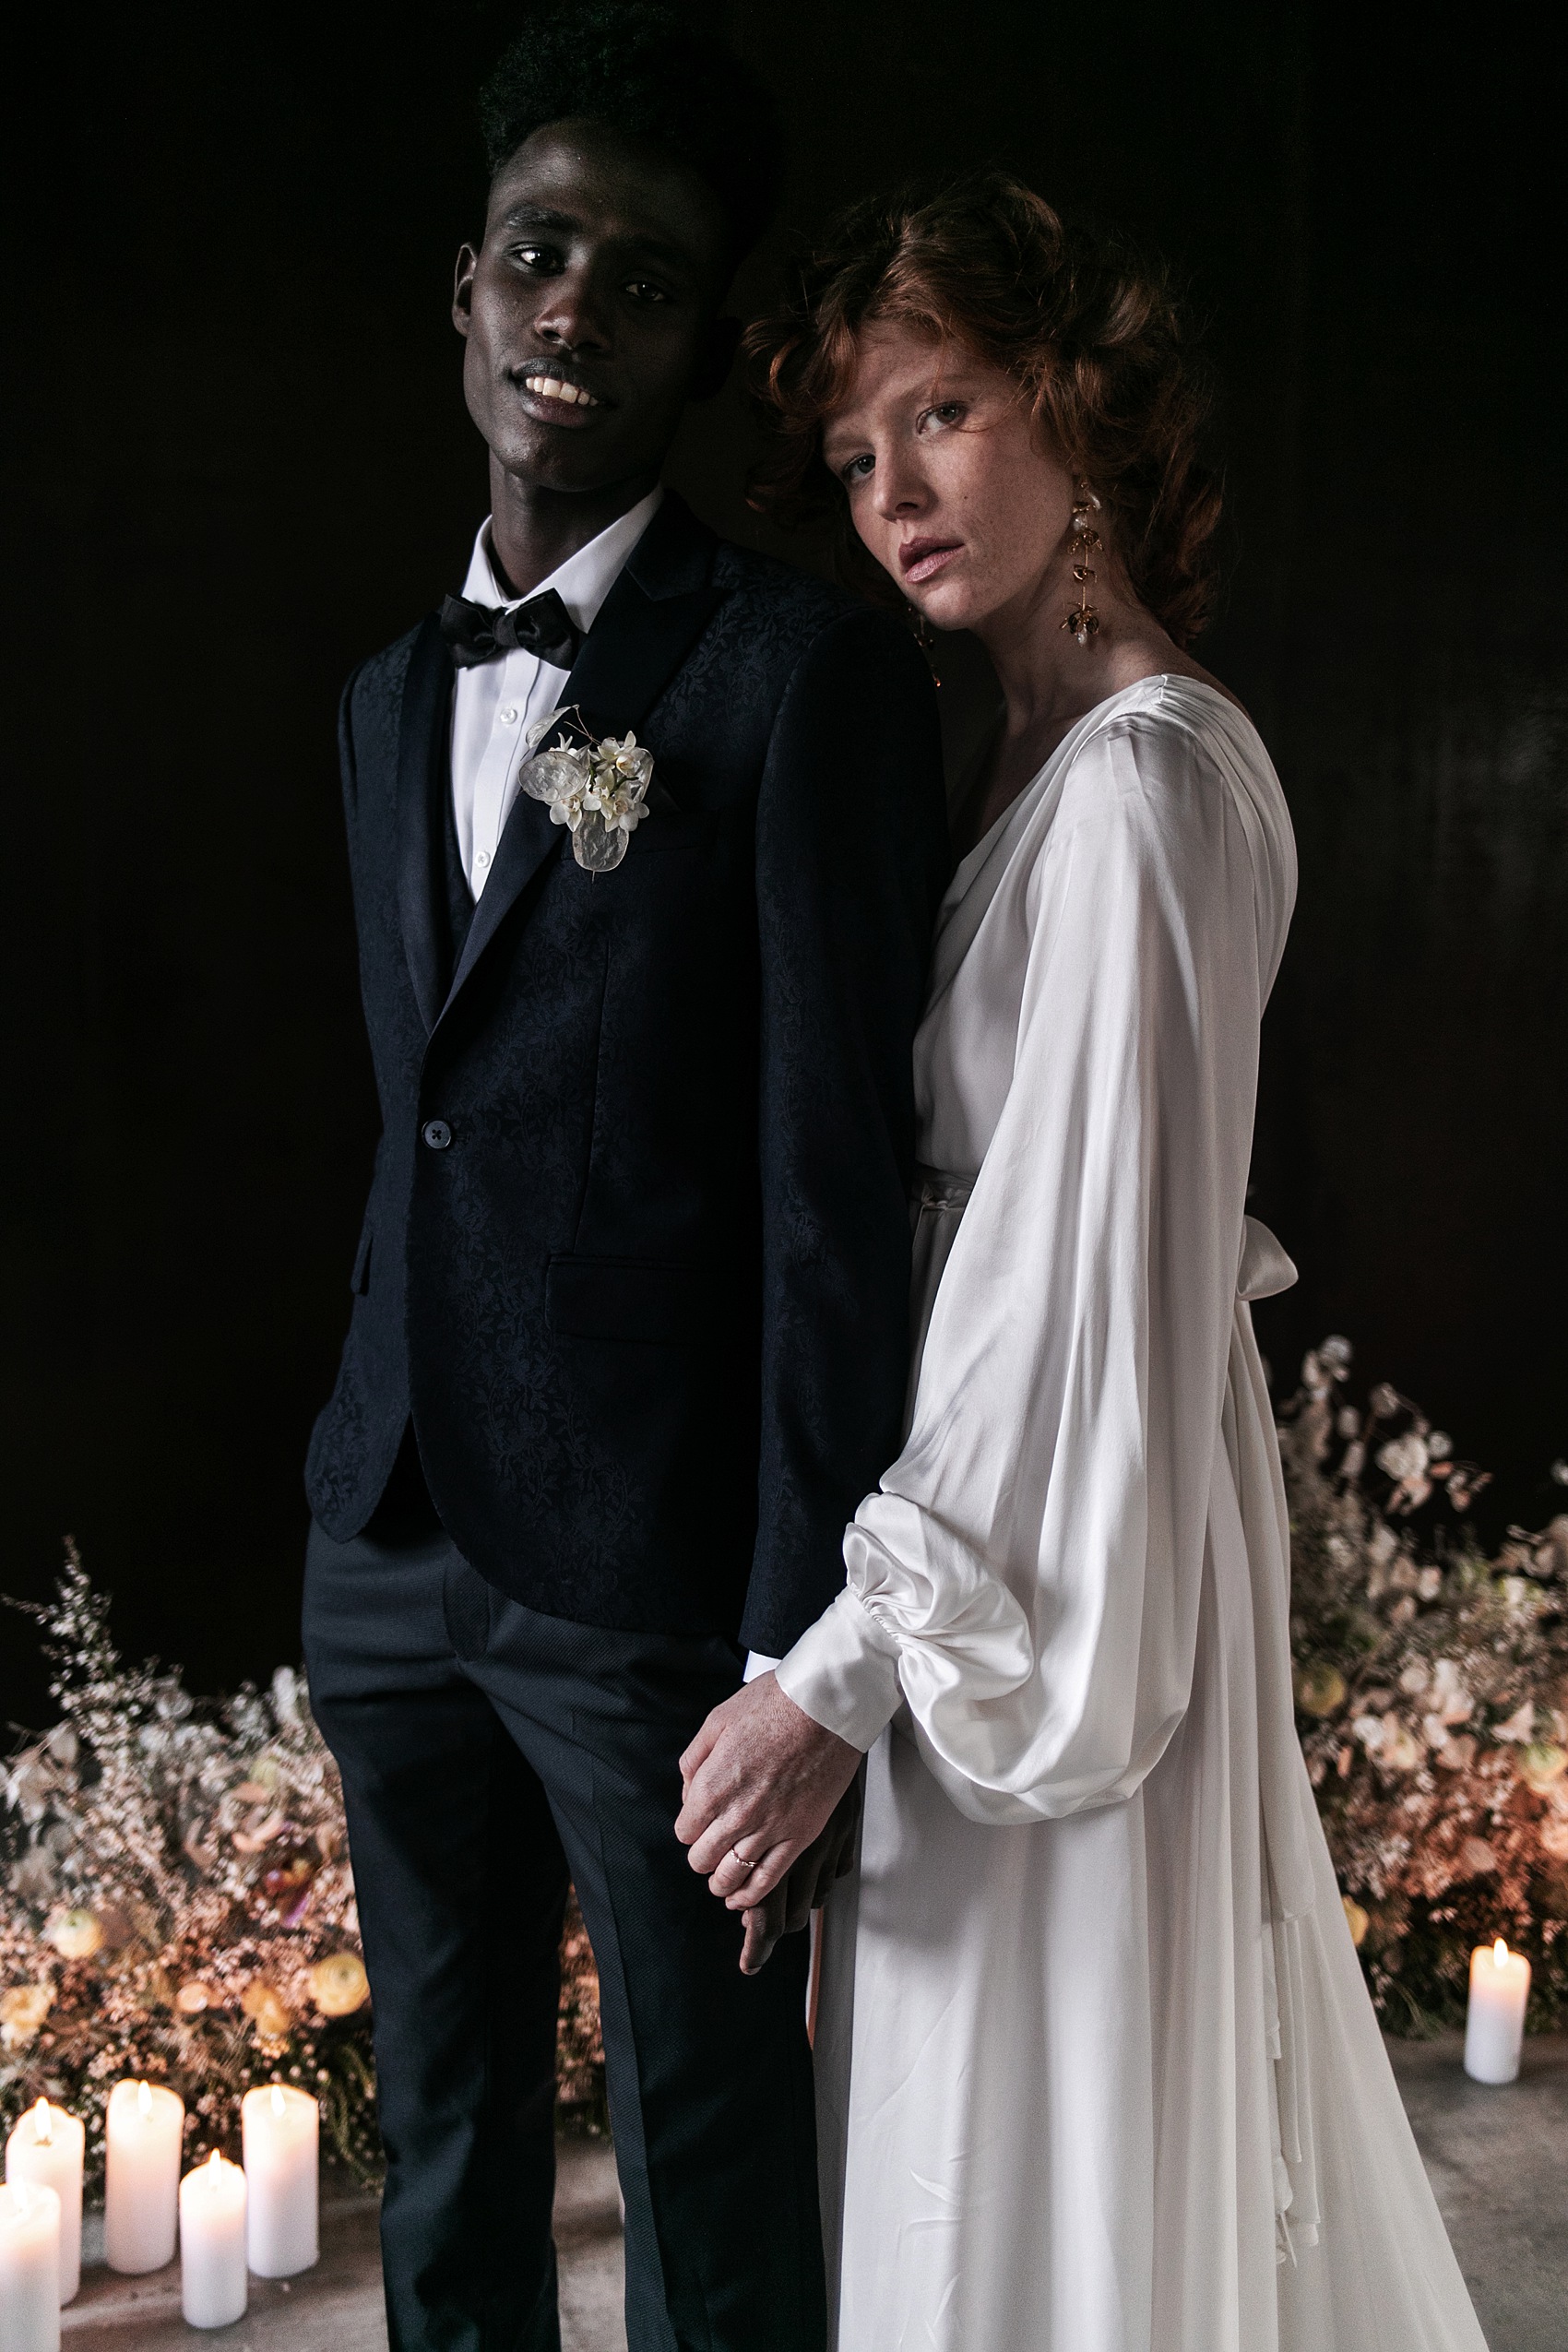 54 Ethical intimate graceful wedding editorial